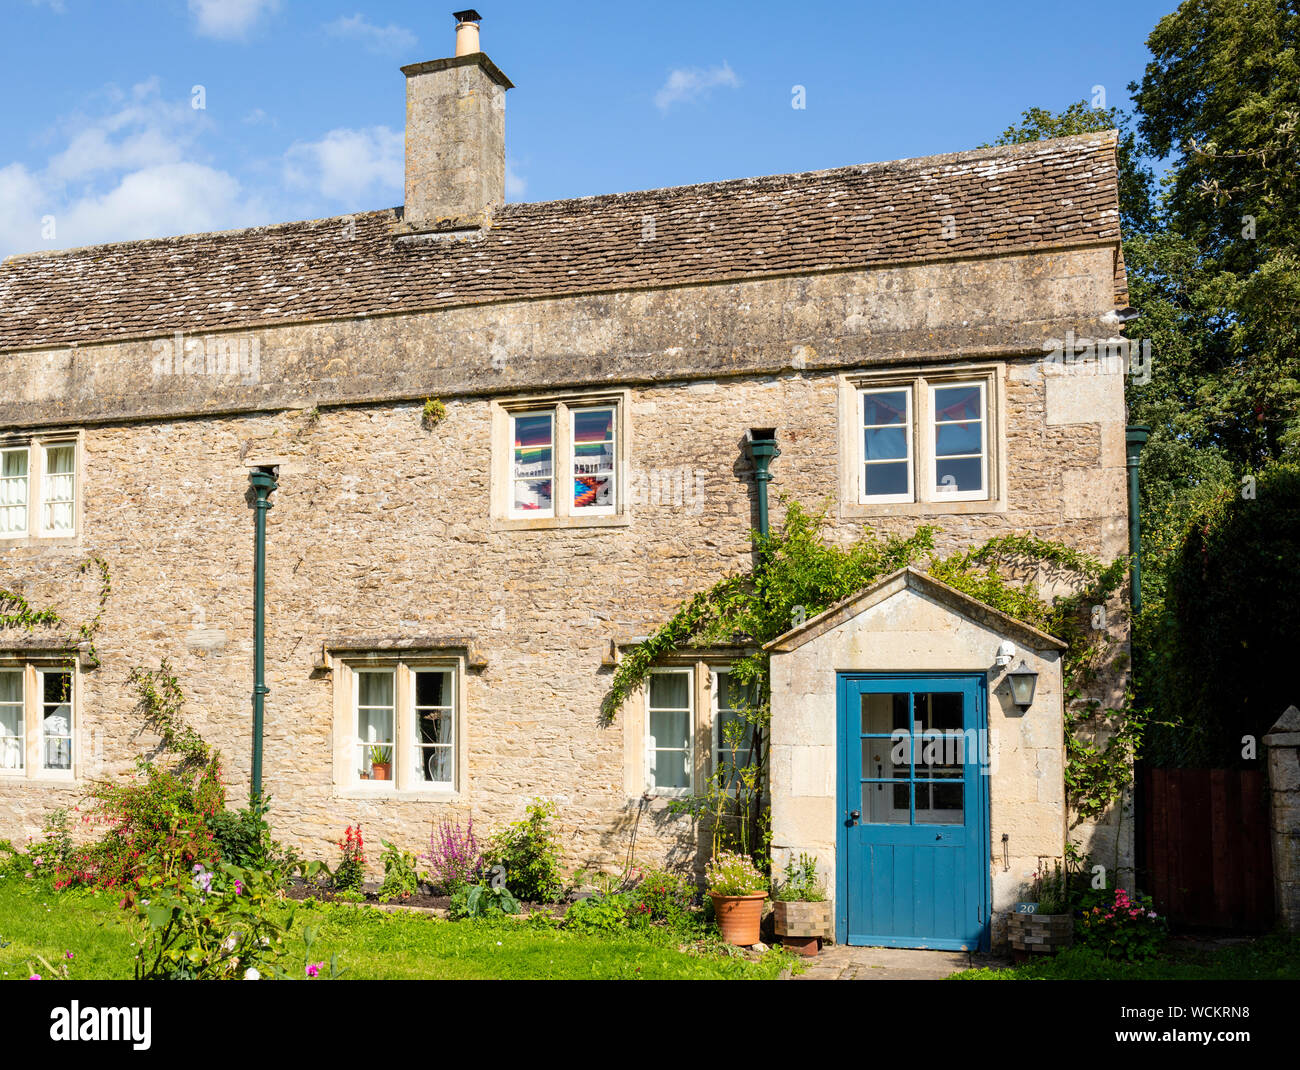 Film location Lacock Harry Potter's parents house Lacock village Wiltshire england uk gb Europe Stock Photo